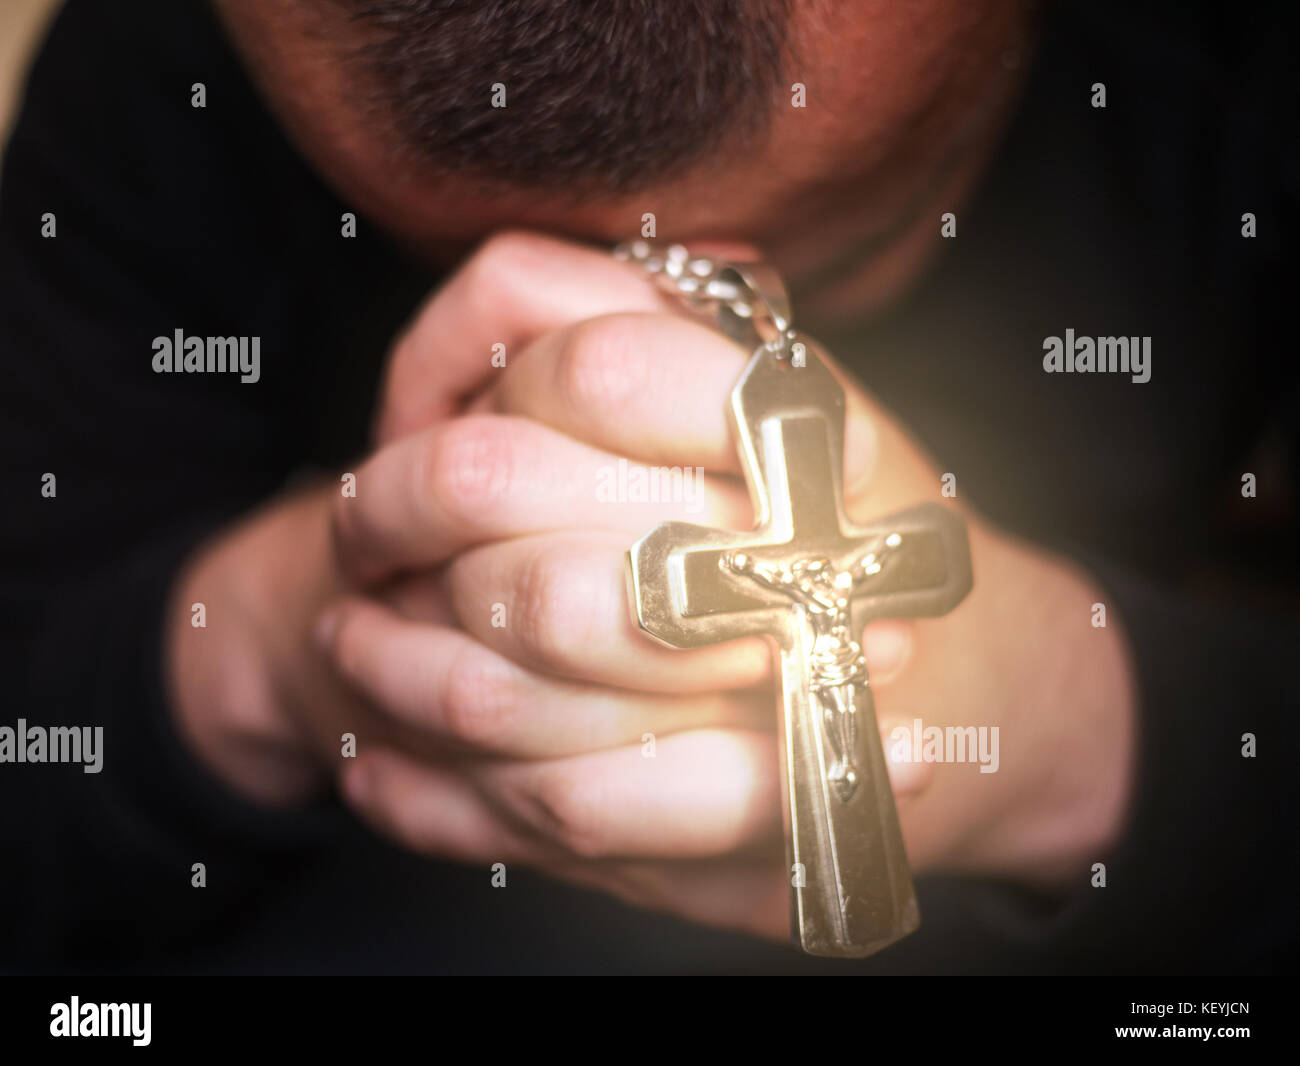 Man praying and holding a cross with Jesus, Christian concept Stock Photo